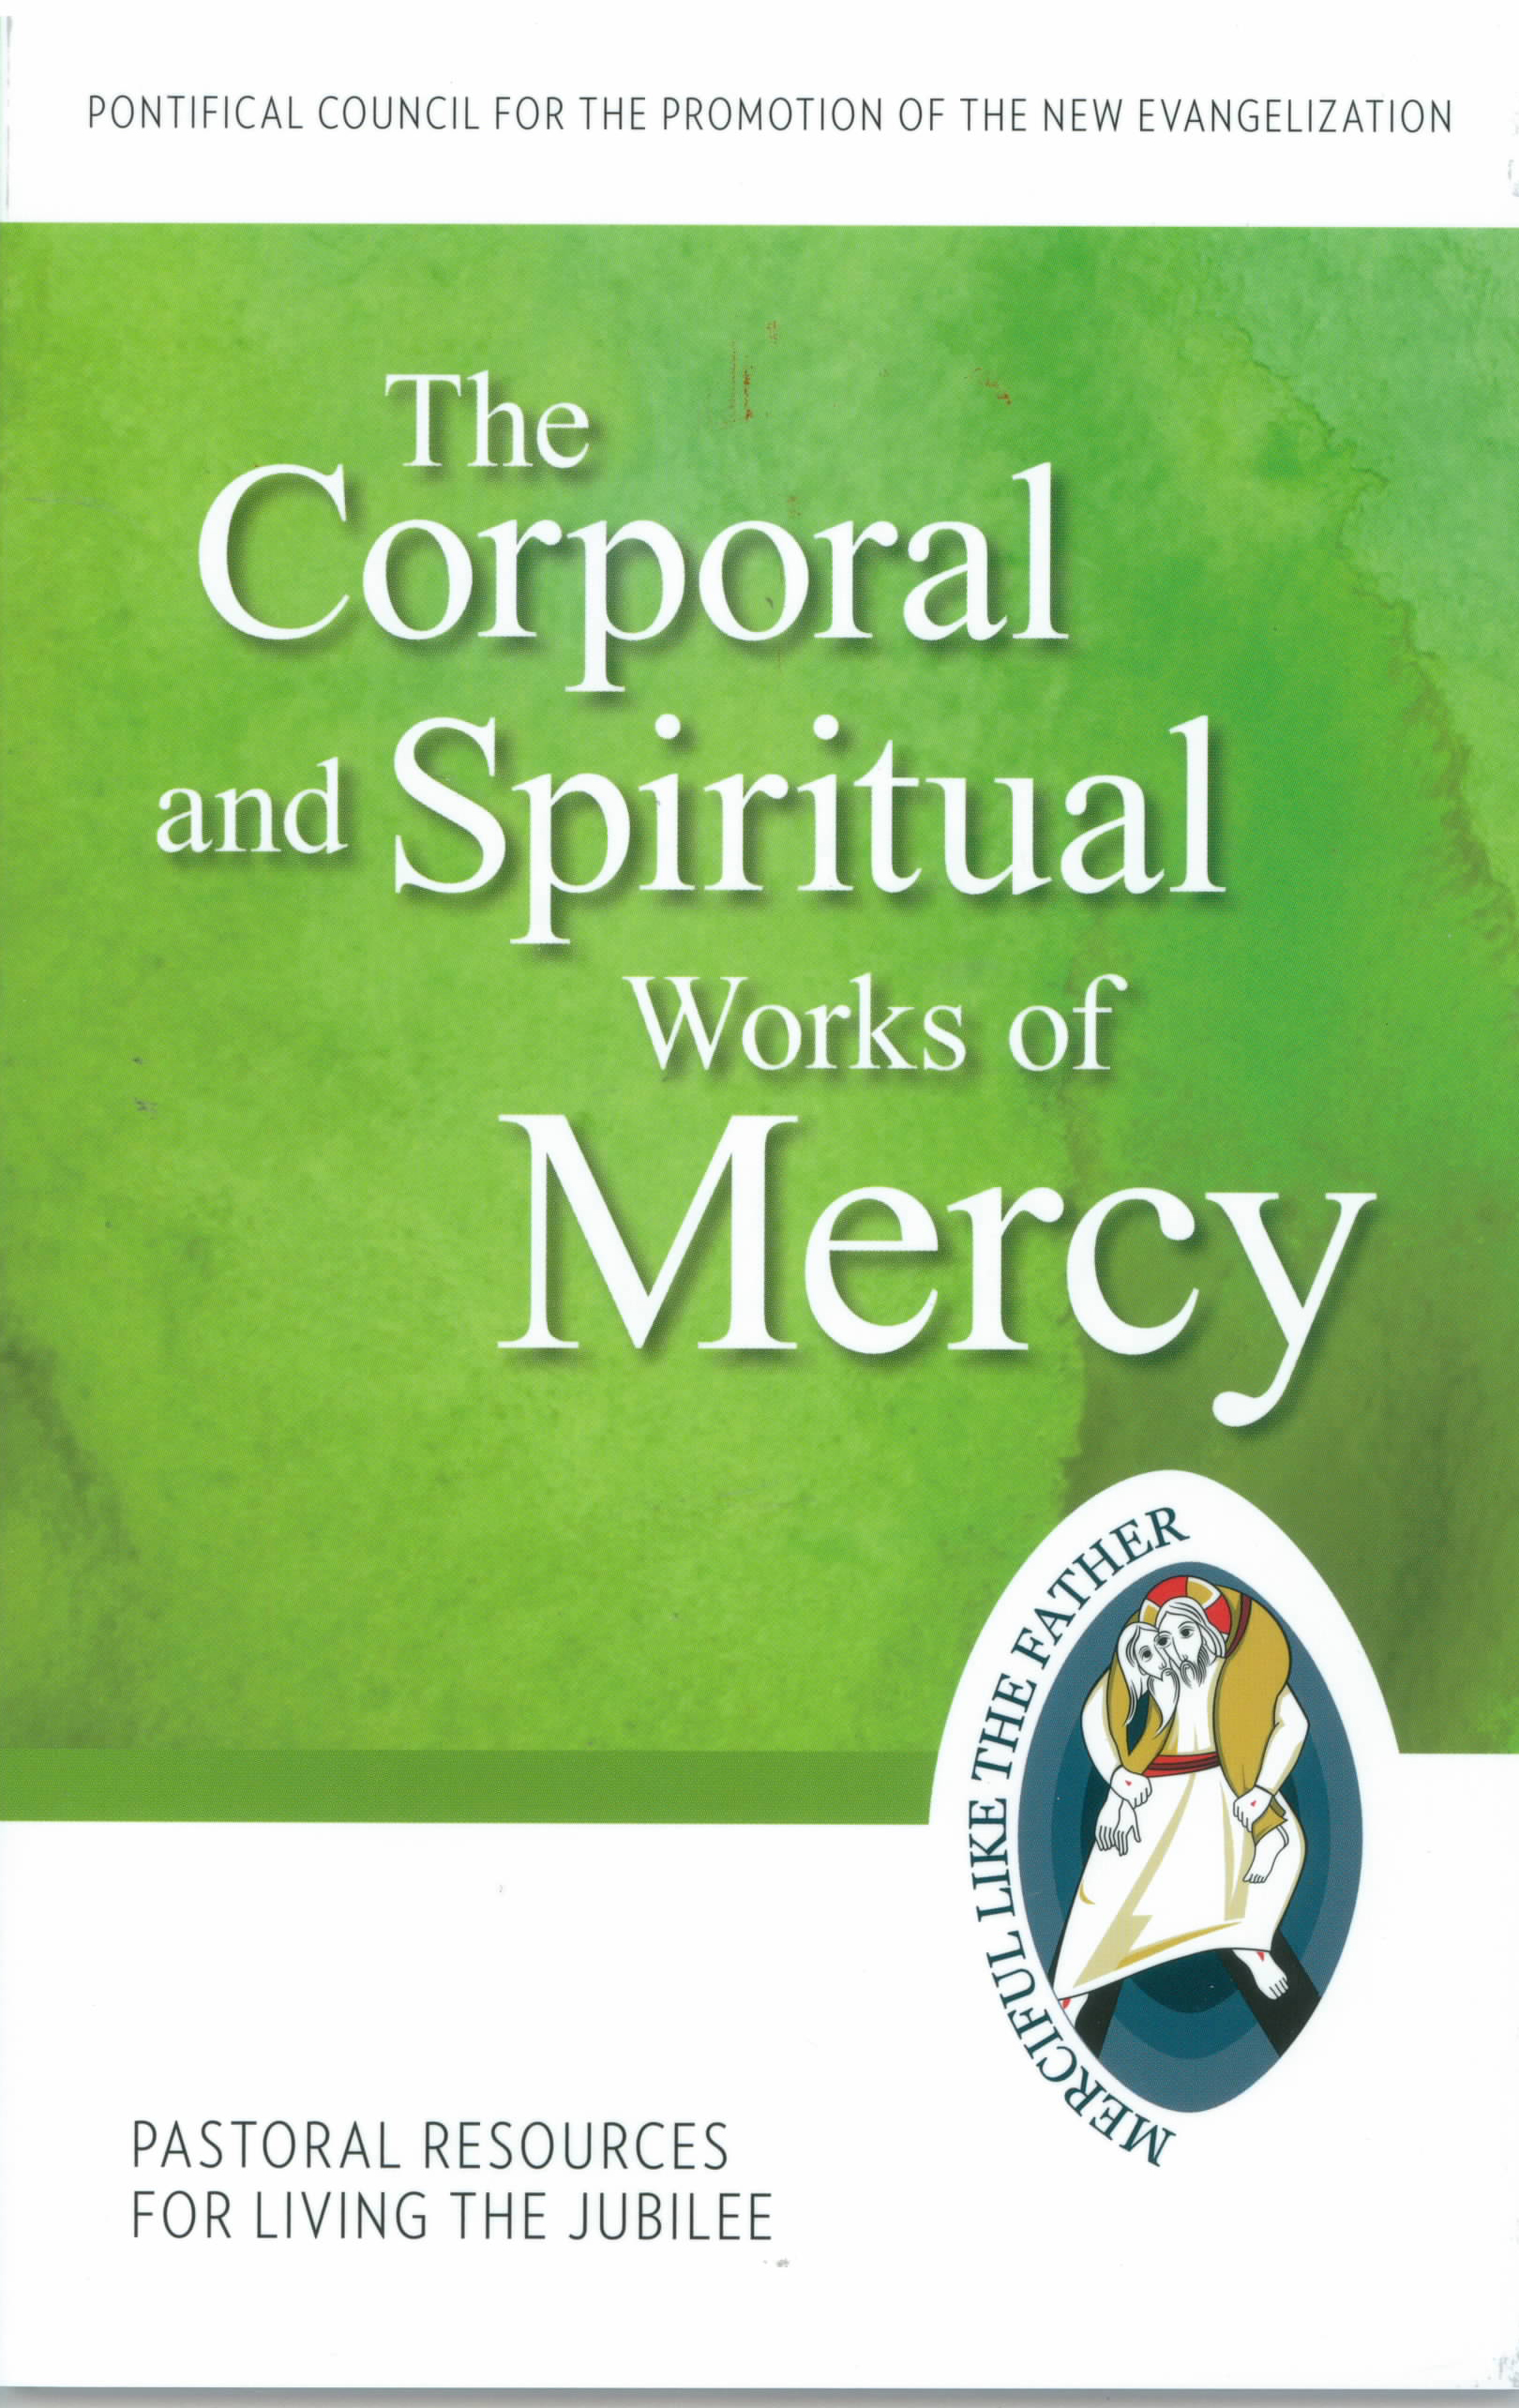 The Corporal and Spiritual Works of Mercy 9781612789811 Pontifical Council for the Promotion of the New Evangelization